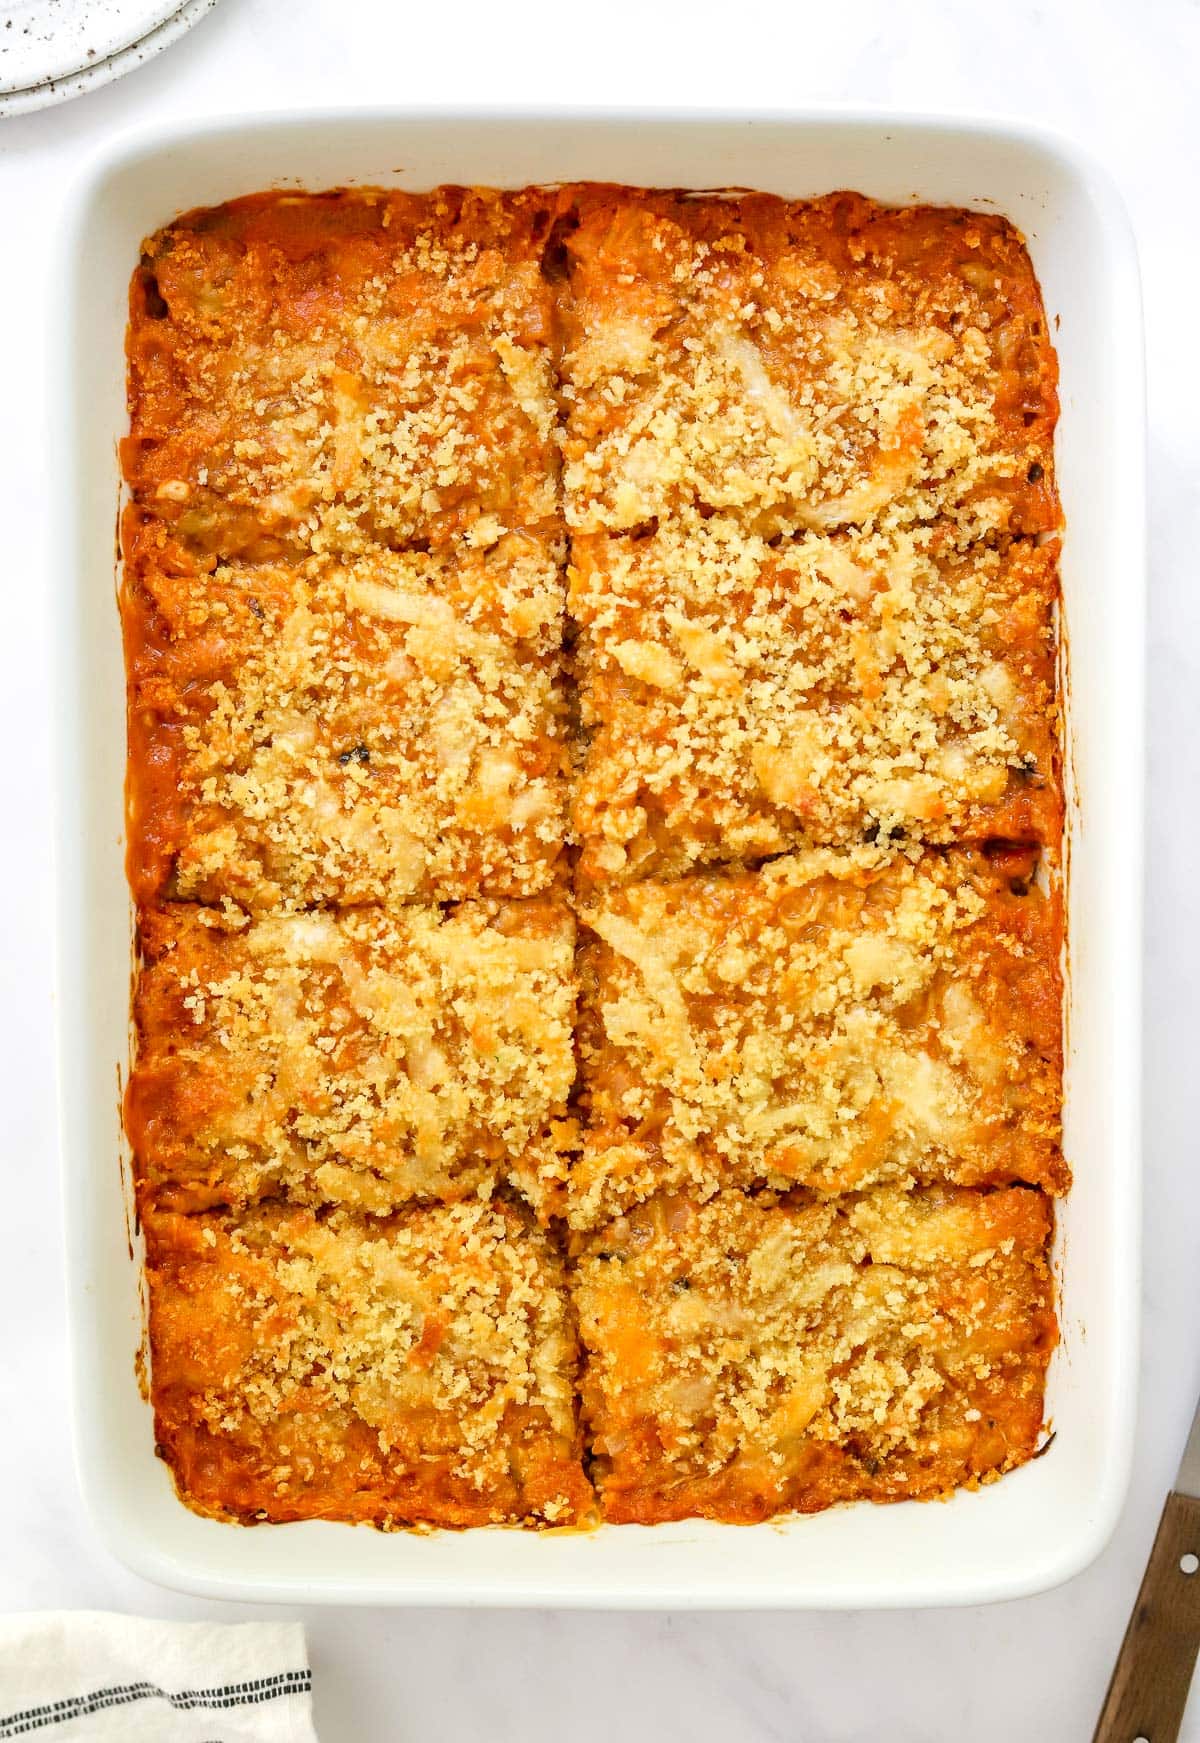 Spaghetti squash casserole in white baking dish and cut into rectangles for serving.